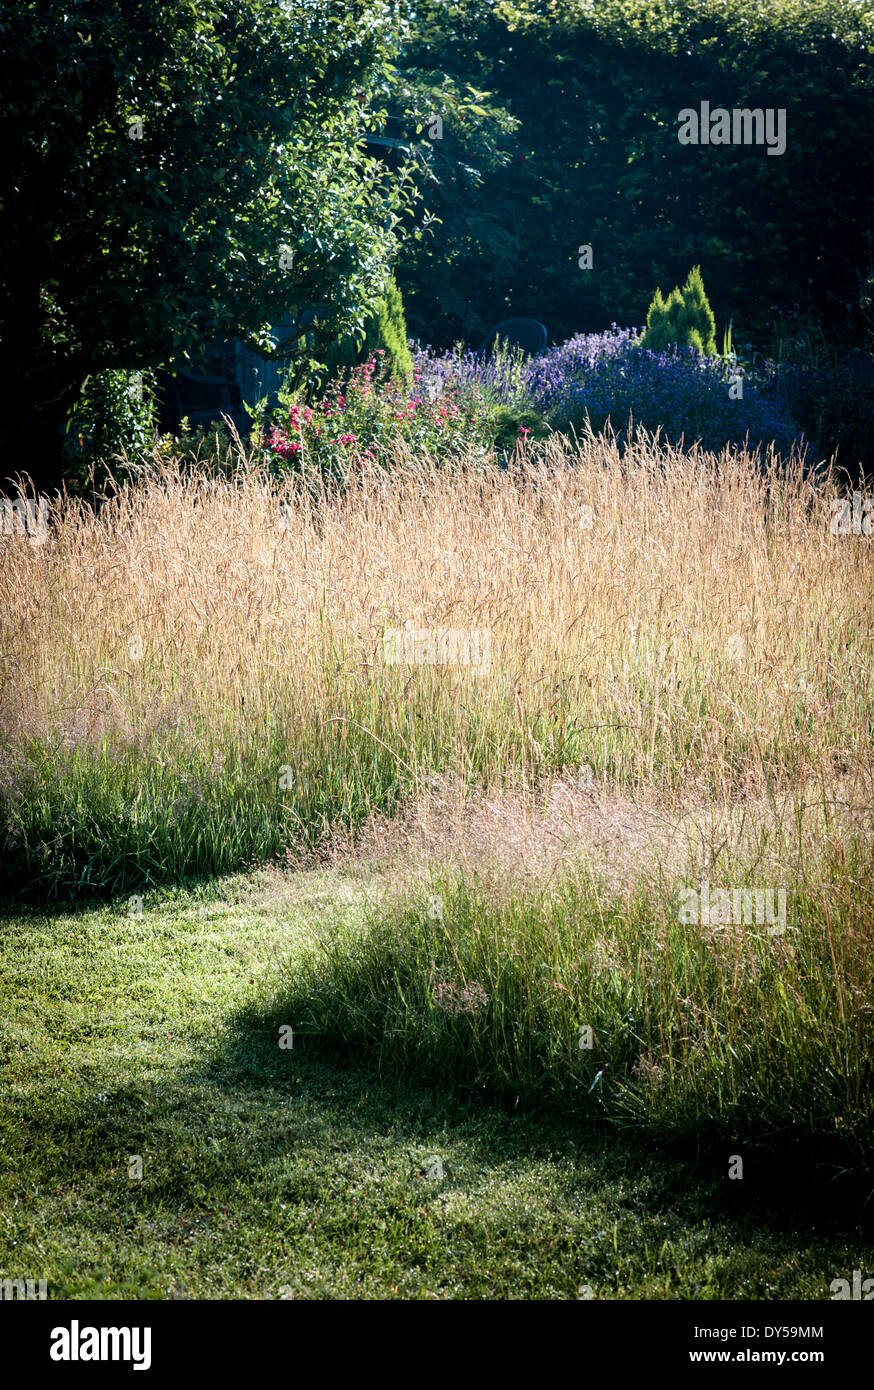 Early morning sun shines through a wild flower meadow on small lawn in an English garden Stock Photo